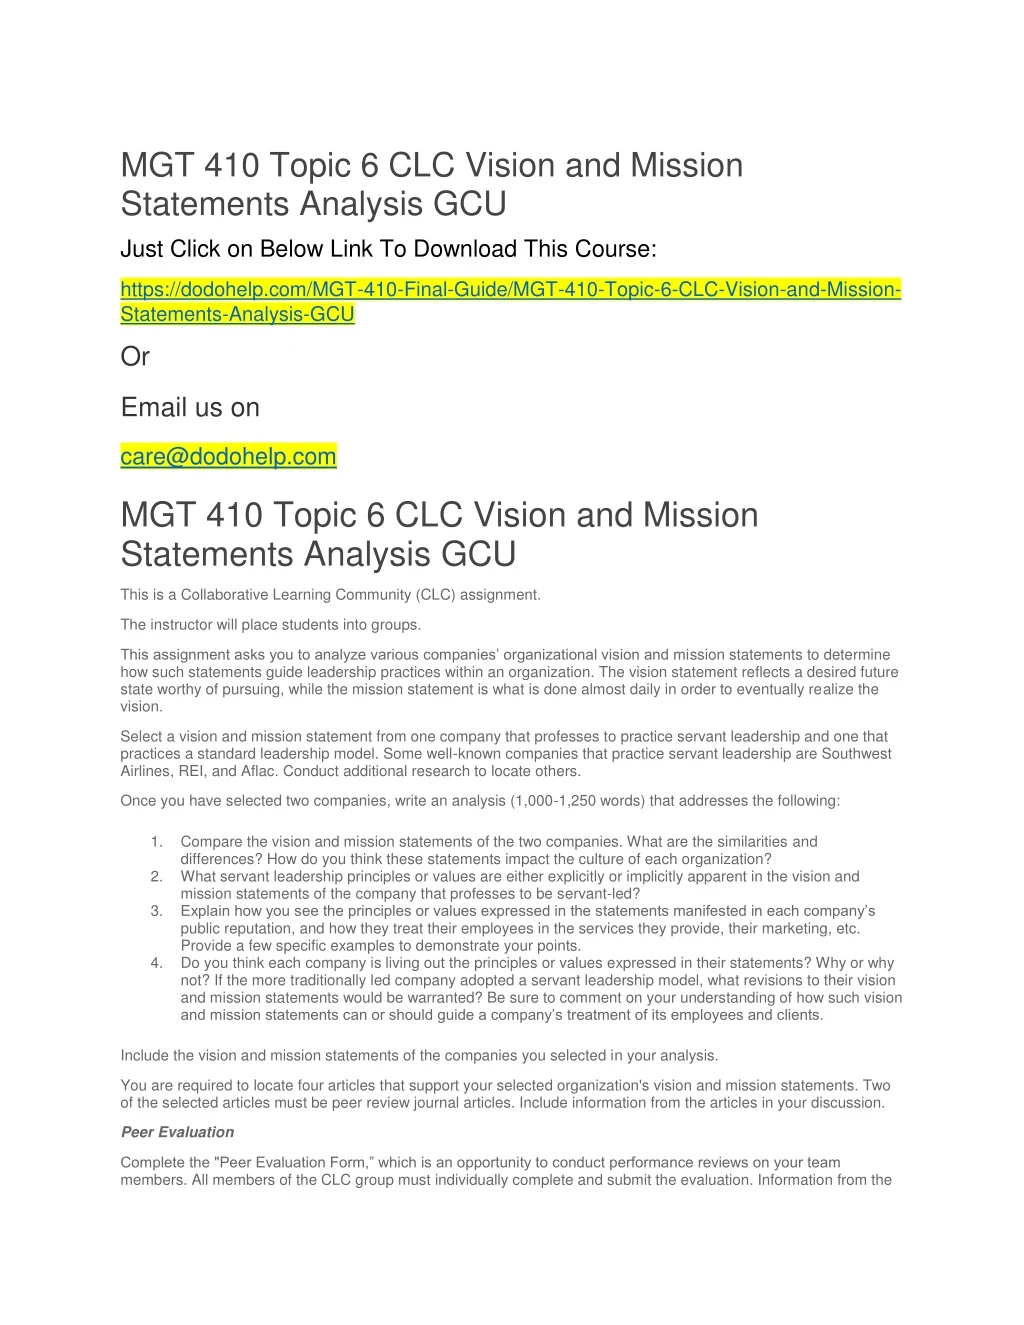 mgt 410 topic 6 clc vision and mission statements